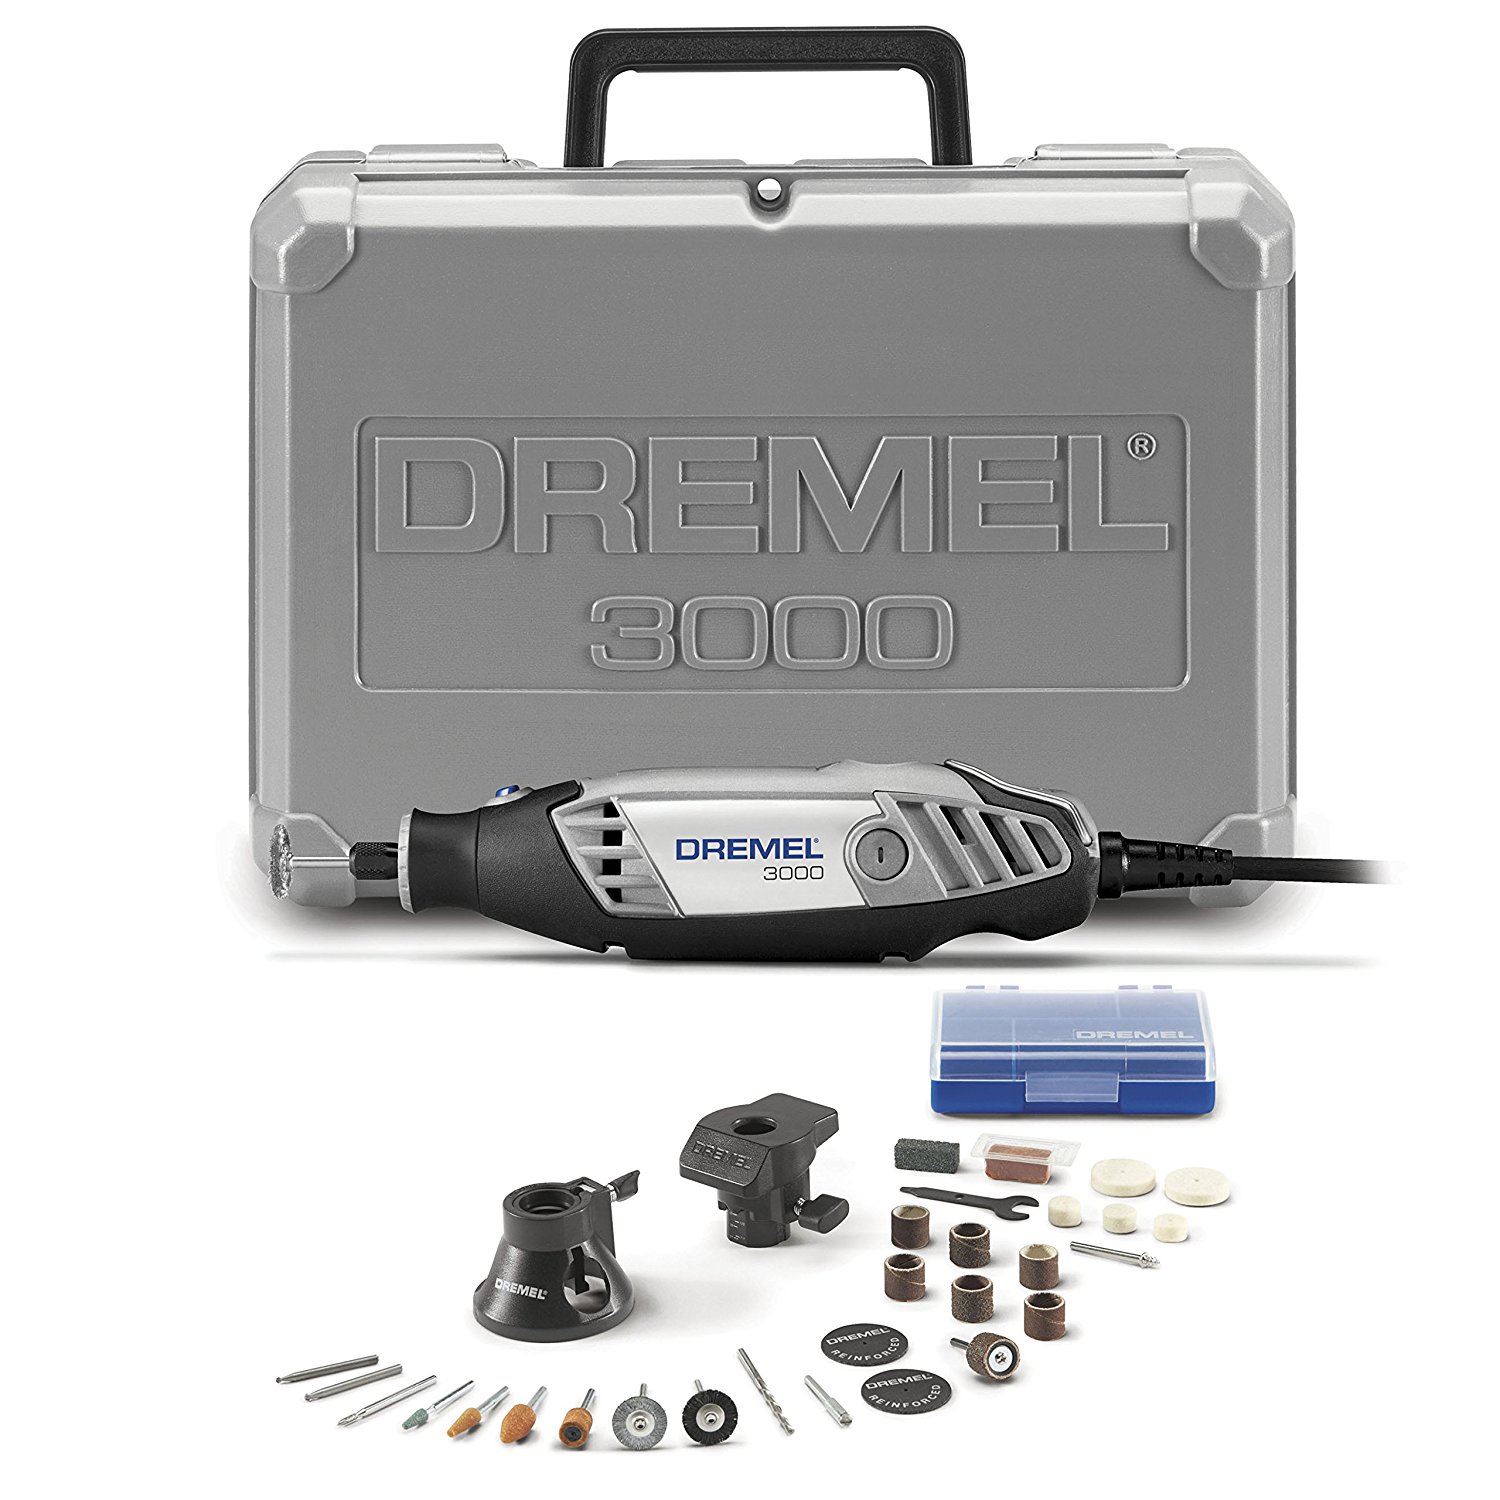 Up to 32% off Dremel! Priced from $29.99!